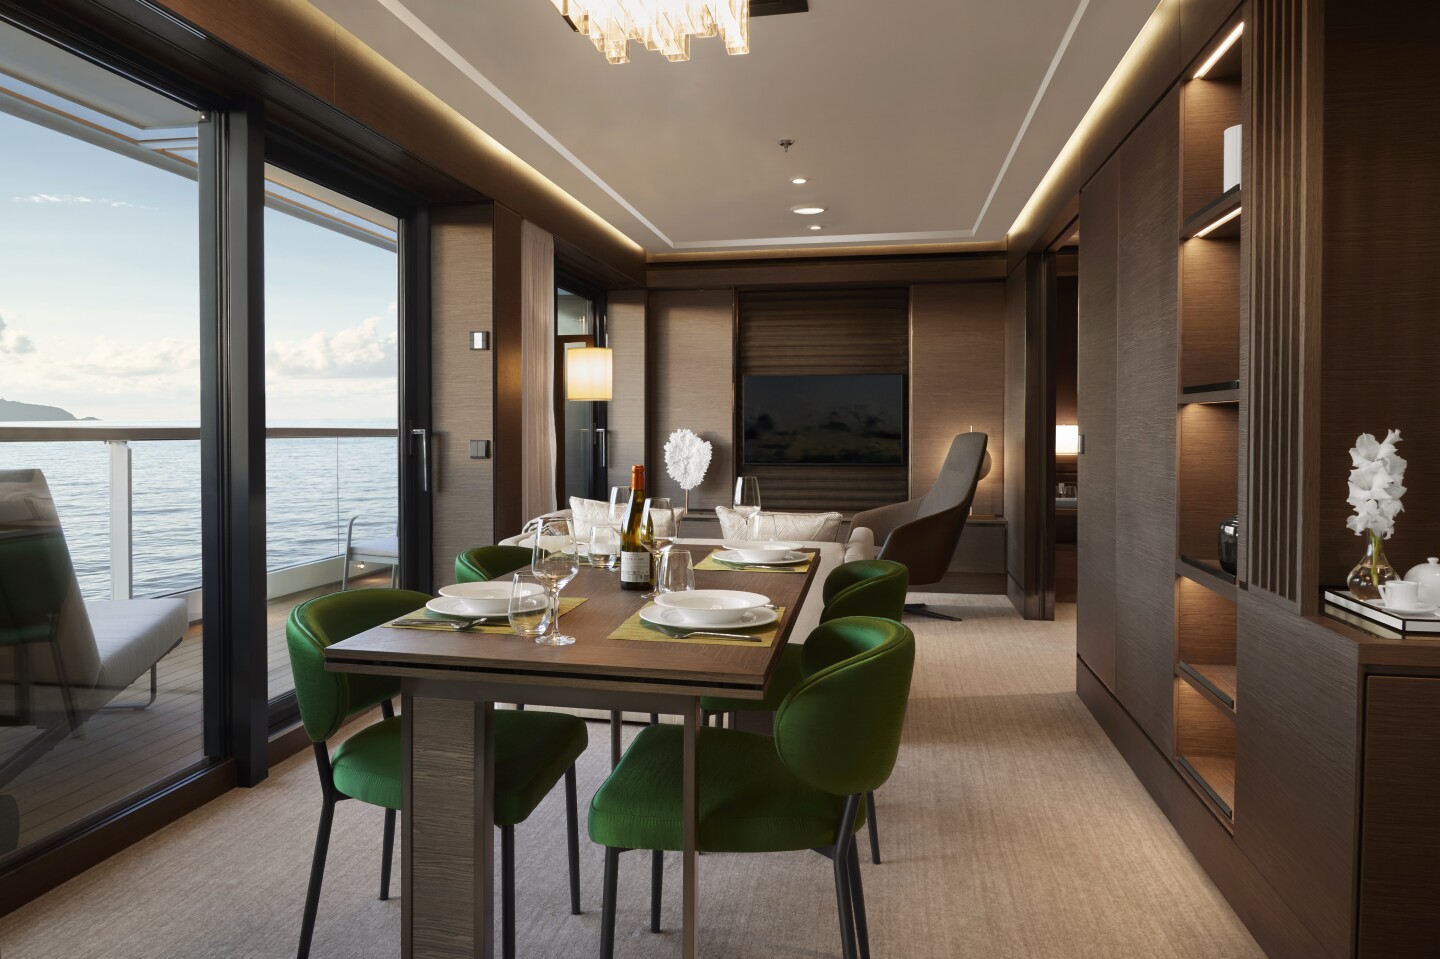 <h3>The Ritz-Carlton Yacht Collection</h3> <p><b>Itinerary: Rome (Civitavecchia) to Valletta</b><br><b>Best for: Luxury experience</b><br><b>Number of days: 10</b><br><b>Starting cost: $10,600 per person</b></p> <p>You can be sure that the Ritz-Carlton Yacht Collection is going to deliver high-end resort cruising, and that’s certainly the case on the 298-passenger <i>Evrima</i>, where Moët & Chandon will flow freely as guests <a class="Link" href="https://fave.co/48FQ865" rel="noopener">sail from Rome to Malta</a>. Itinerary creativity is another bonus, as you explore the Amalfi Coast, Puglia, and Syracuse, the ship lingering in several ports so that you can go out on the town, with overnights in both Sorrento, where there is time to visit the emerald waters of the Grotta dello Smeraldo, and Taranto, with its white beaches and dolphin-spotting.</p>